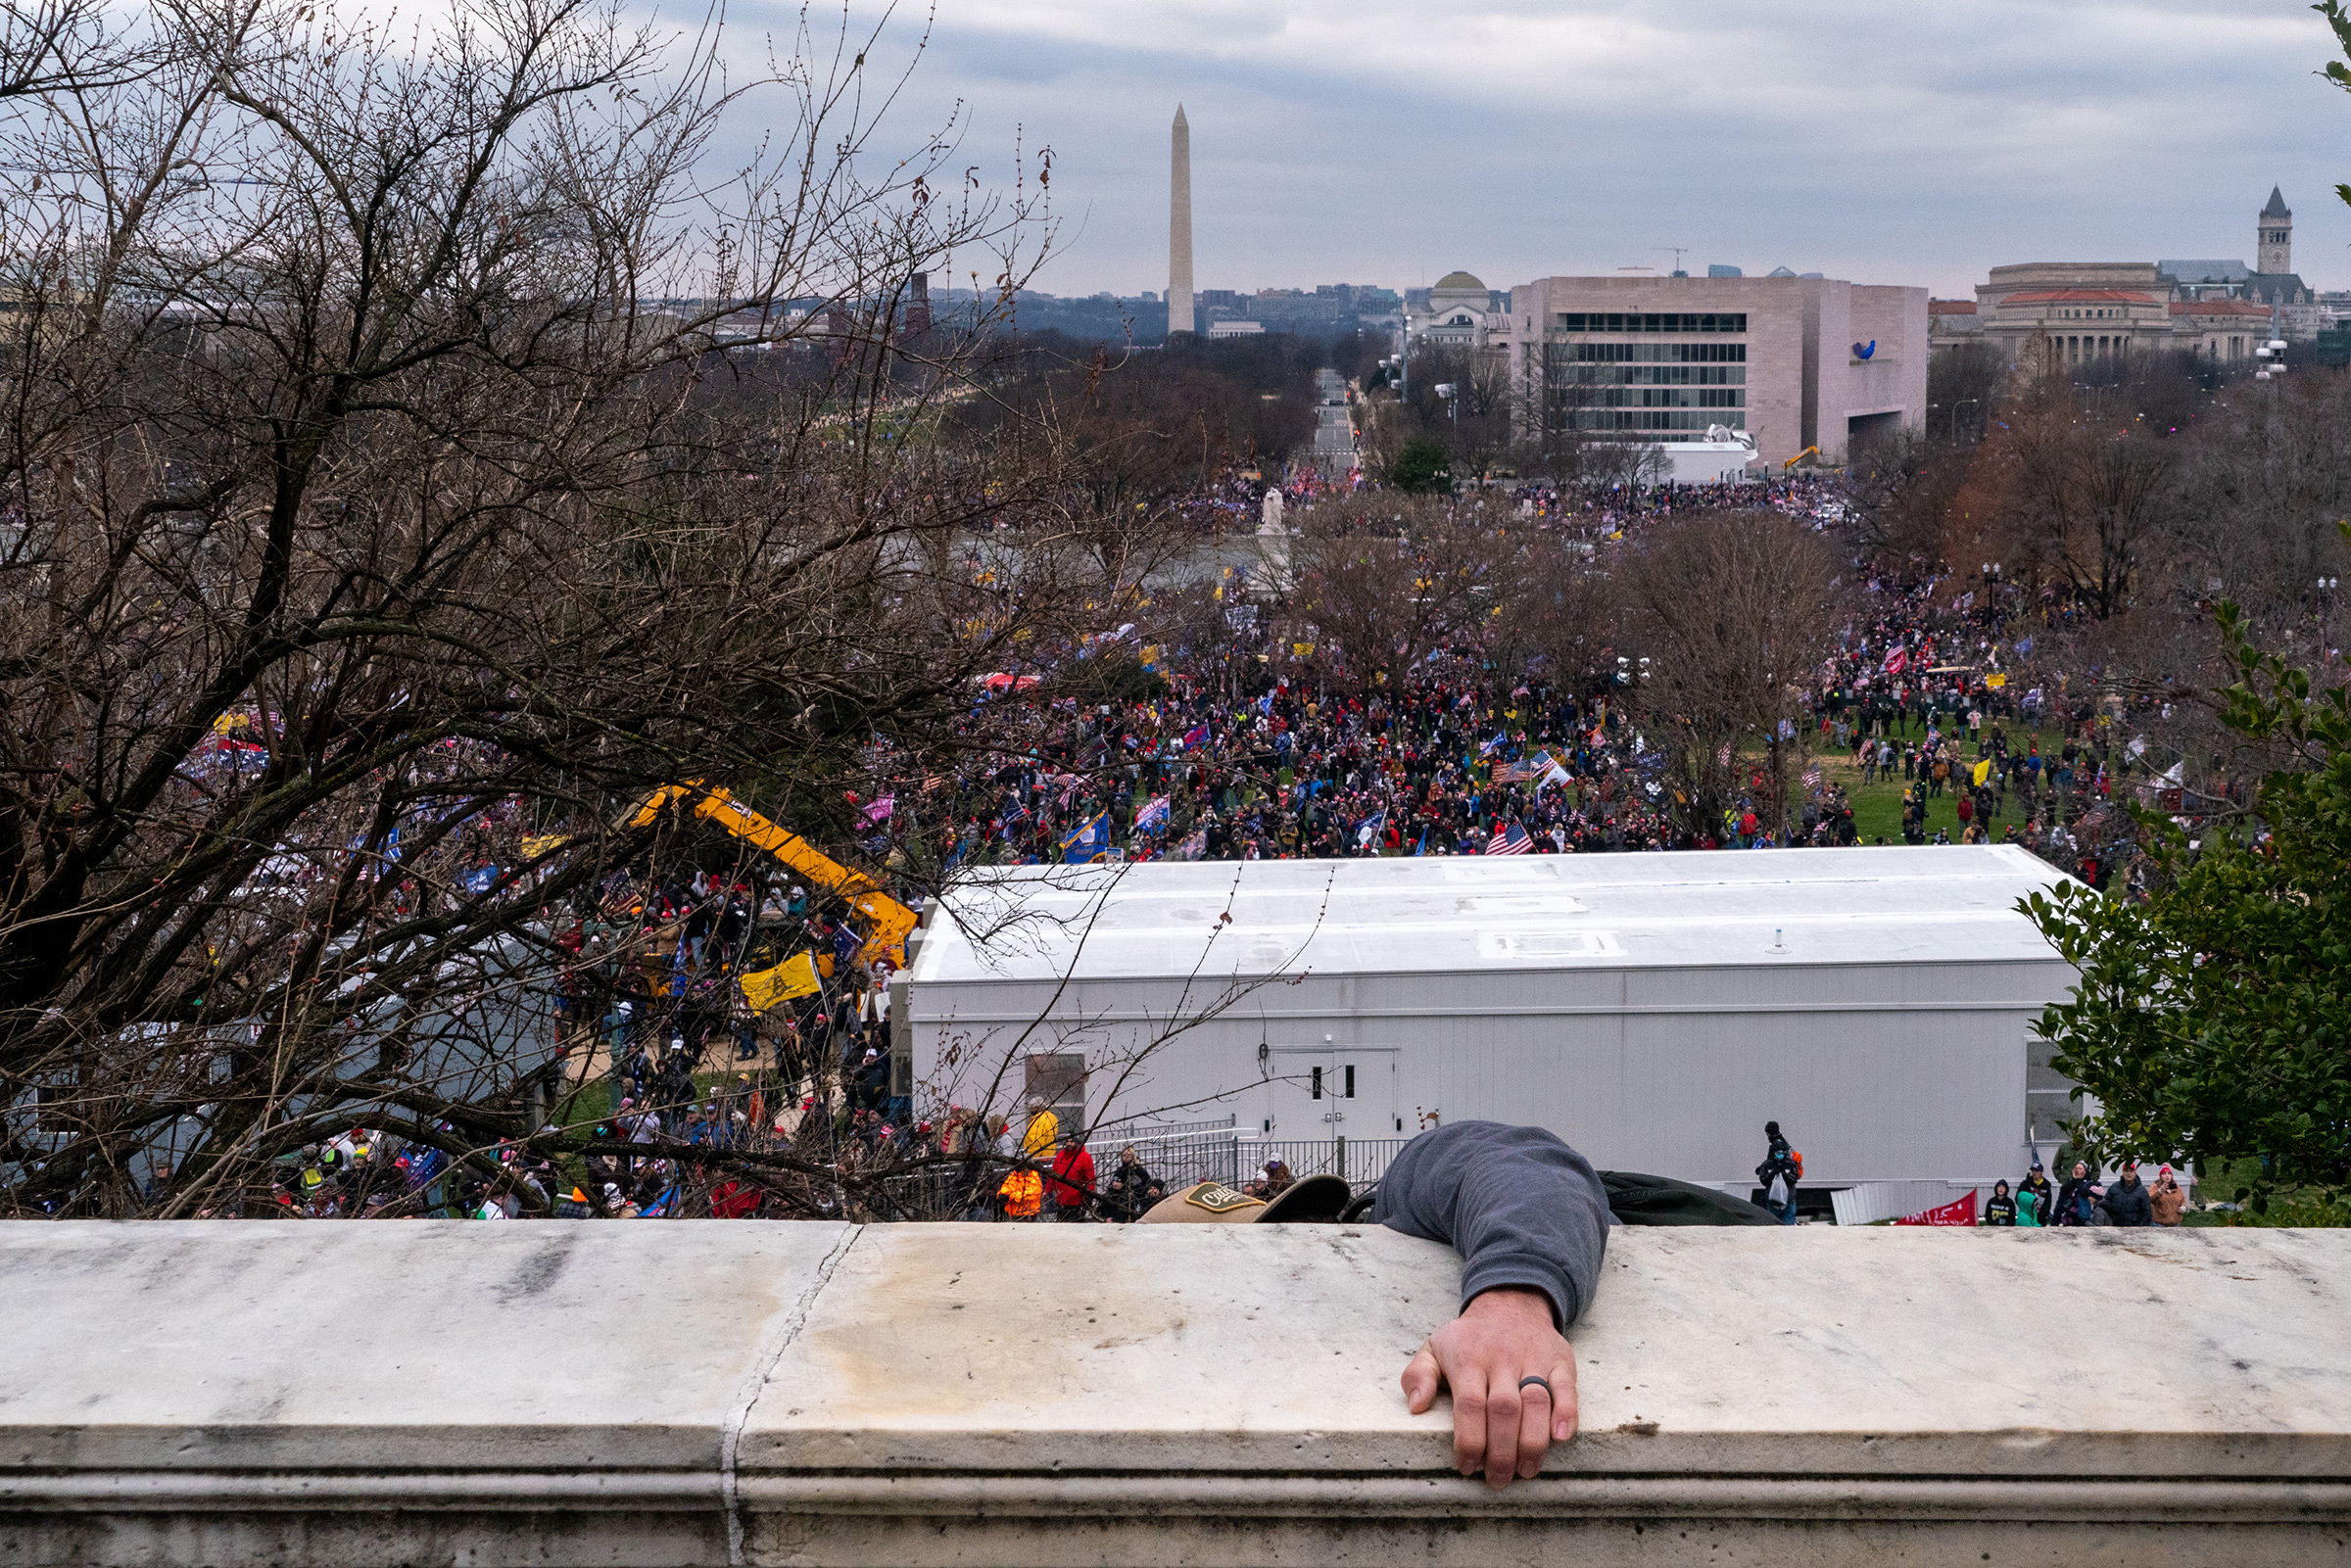 A pro-Trump rioter climbs the walls of the <a href="https://time.com/5930502/donald-trump-america-photographs/">Capitol</a> on Jan. 6. (Peter van Agtmael—Magnum Photos for TIME)